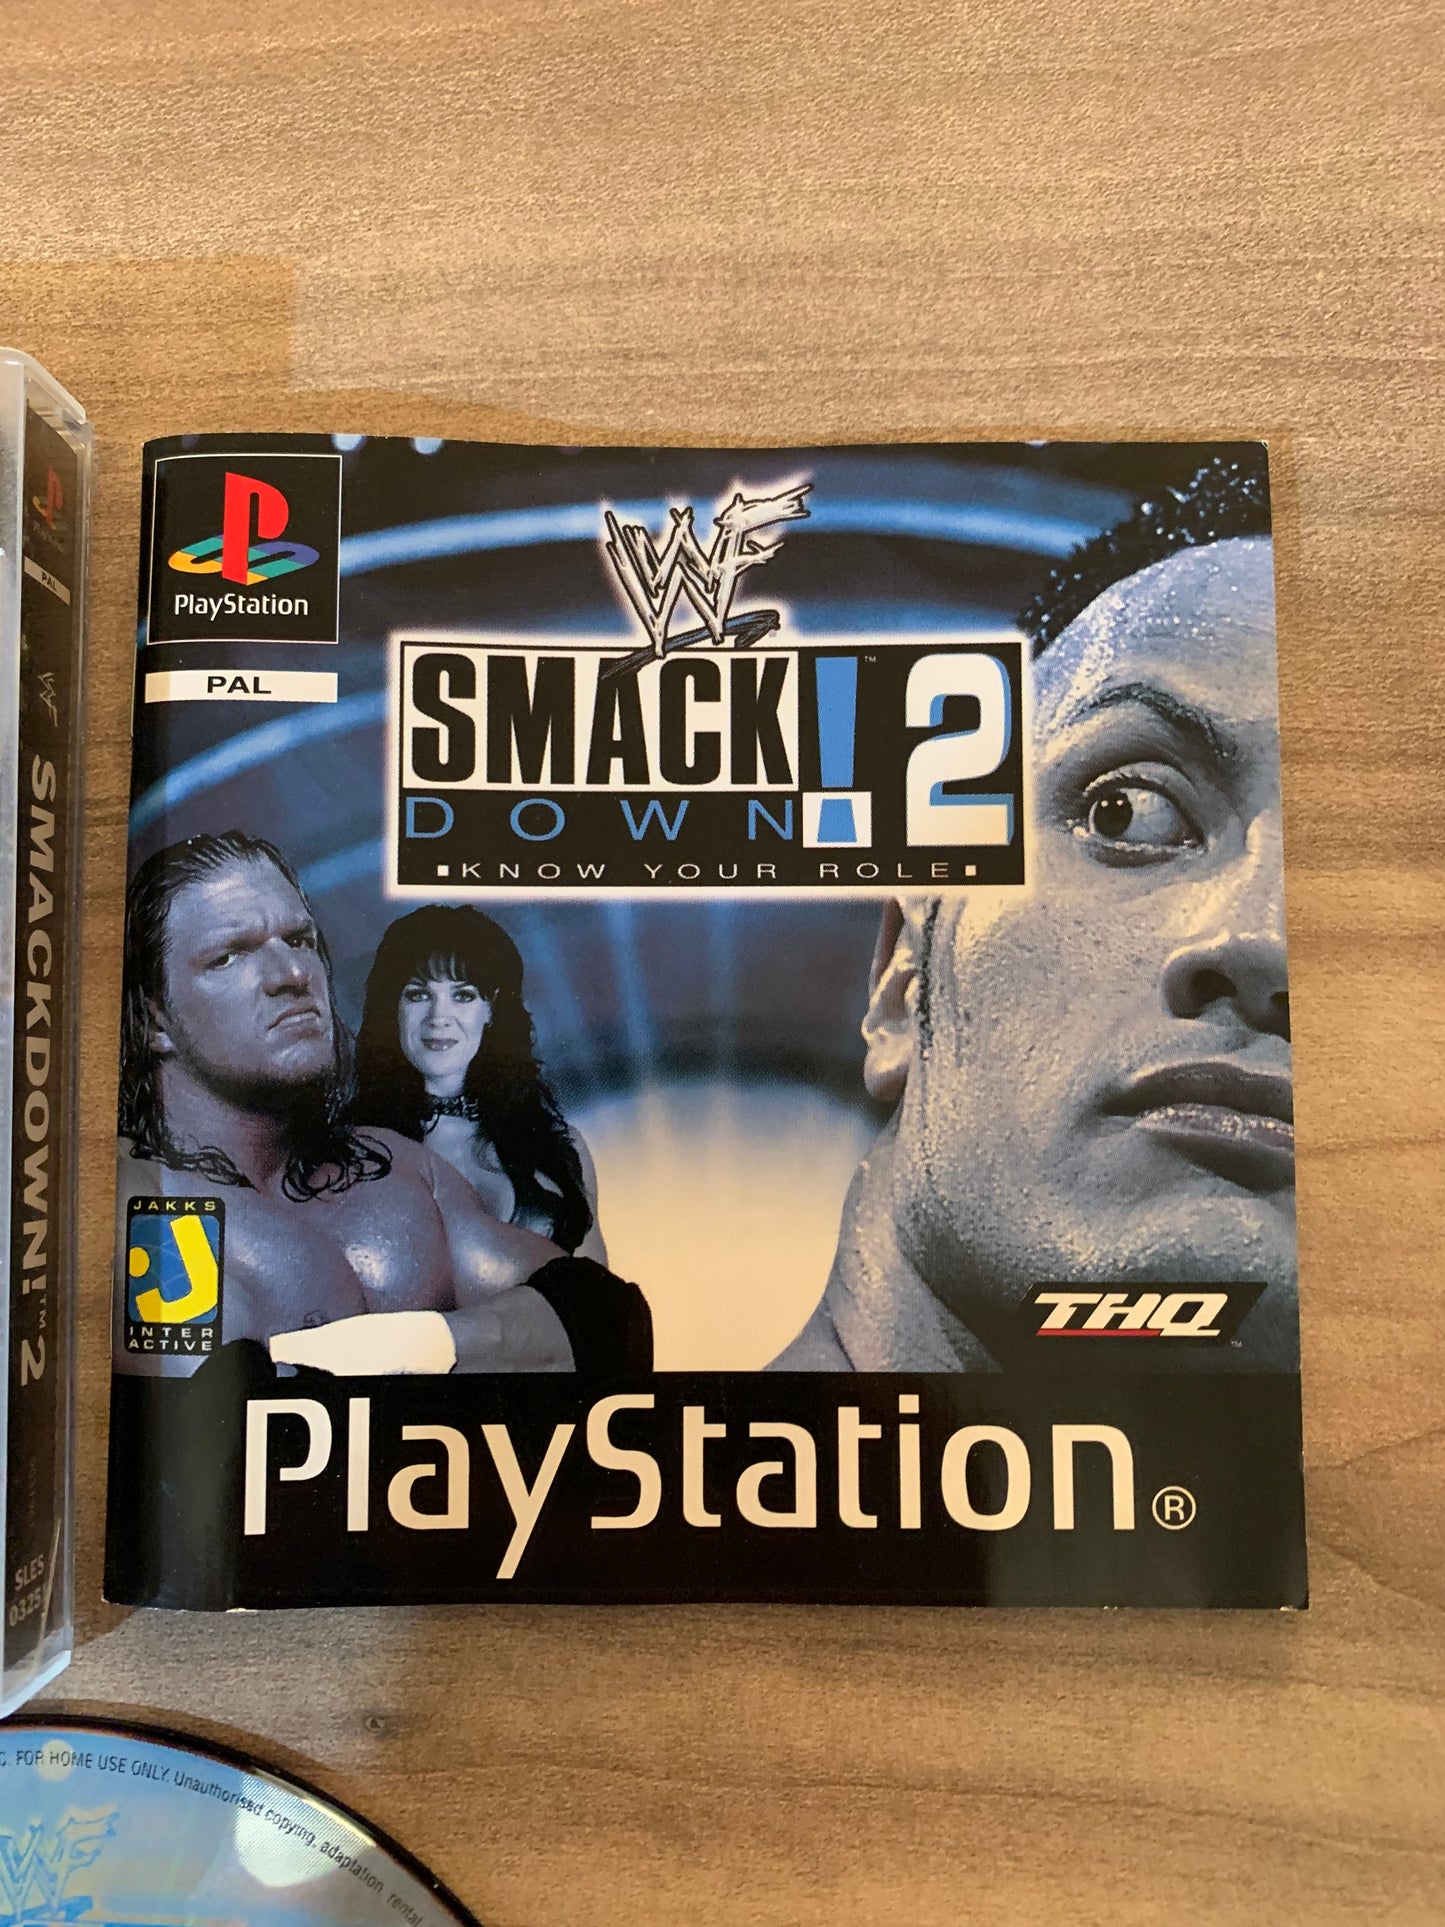 SONY PLAYSTATiON [PS1] | WWF SMACKDOWN 2 KNOW YOUR ROLE